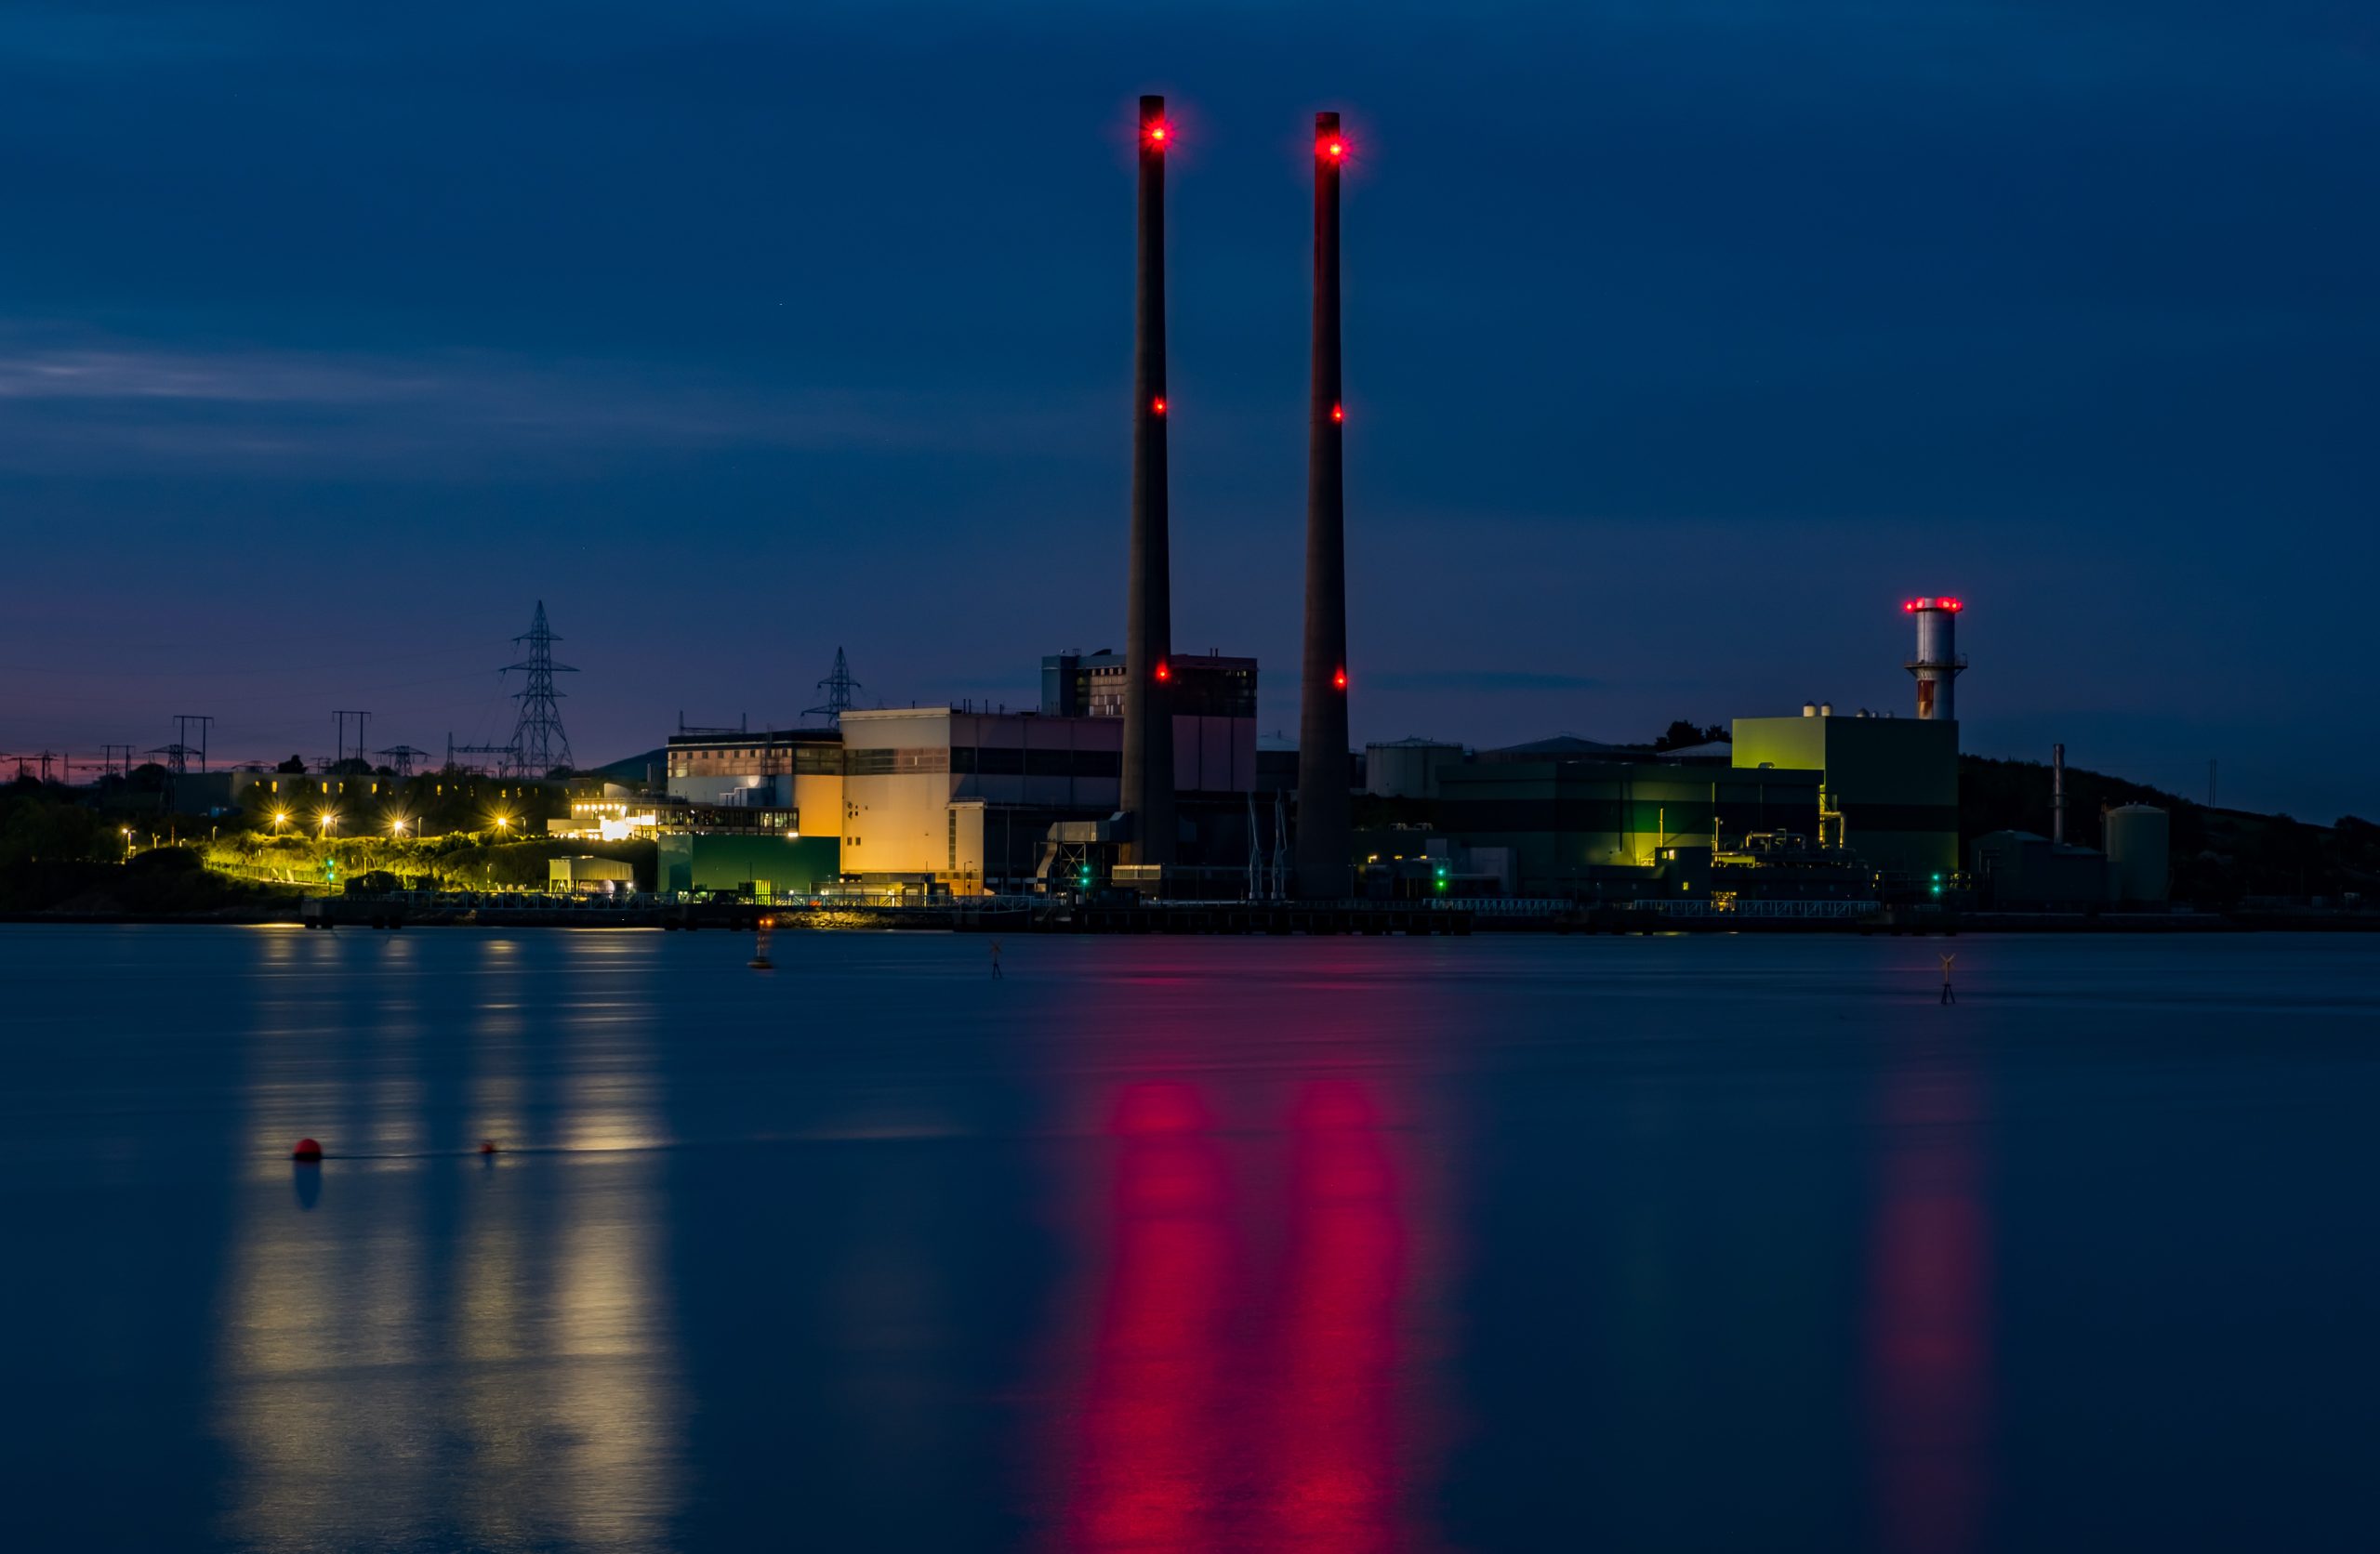 Night image of the Geo Thermal Power Station.